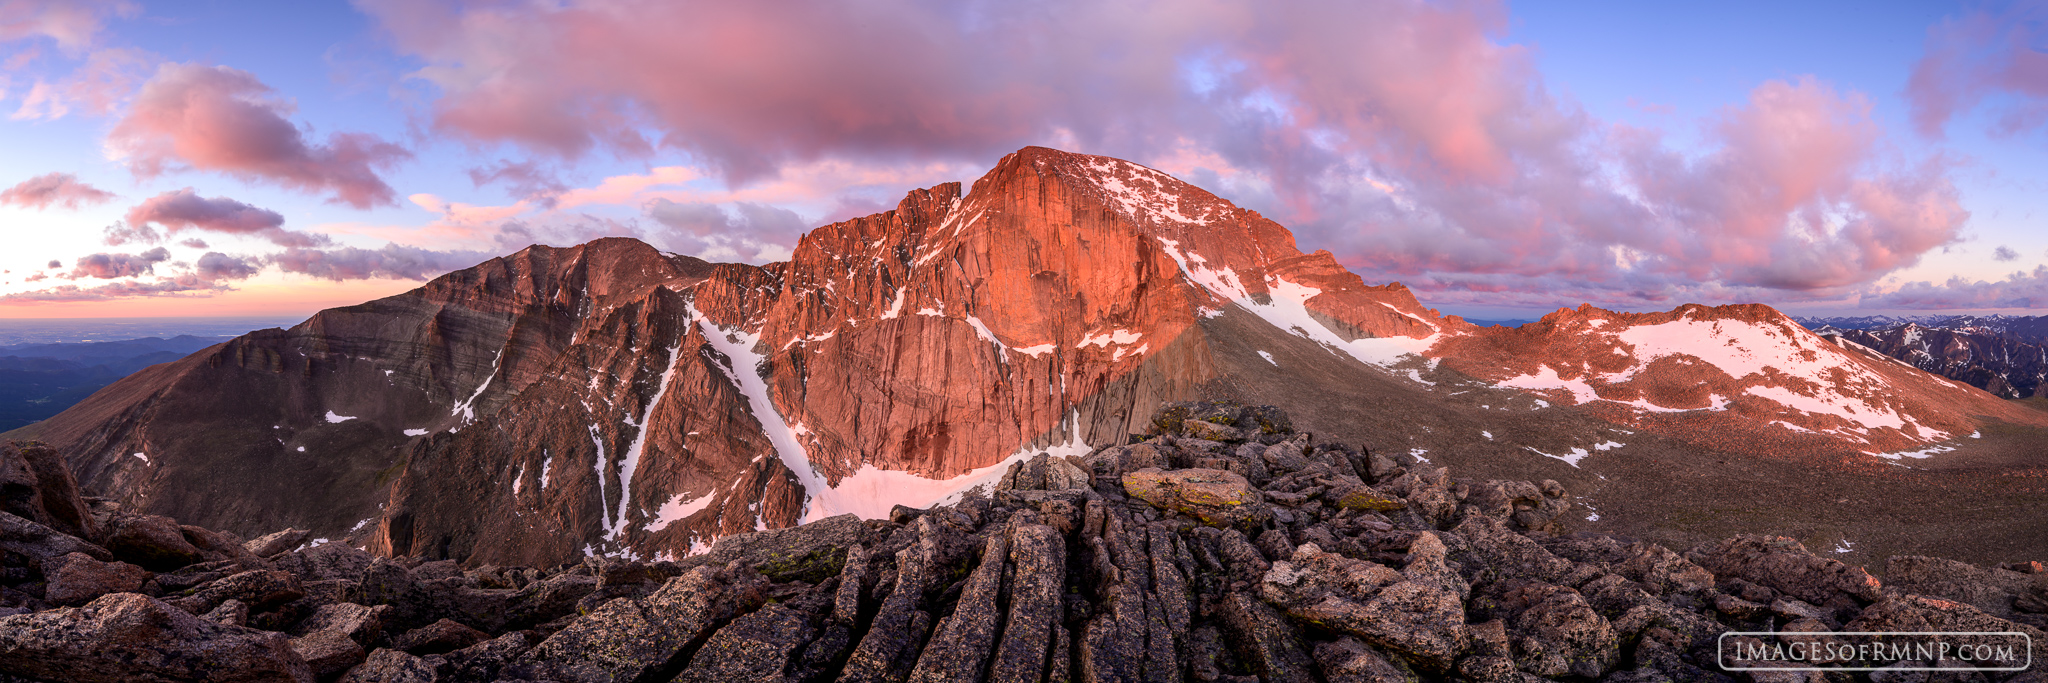 Rocky Mountain National Park is one of our nation's most well-known and loved national parks. At its heart is Longs Peak, an...